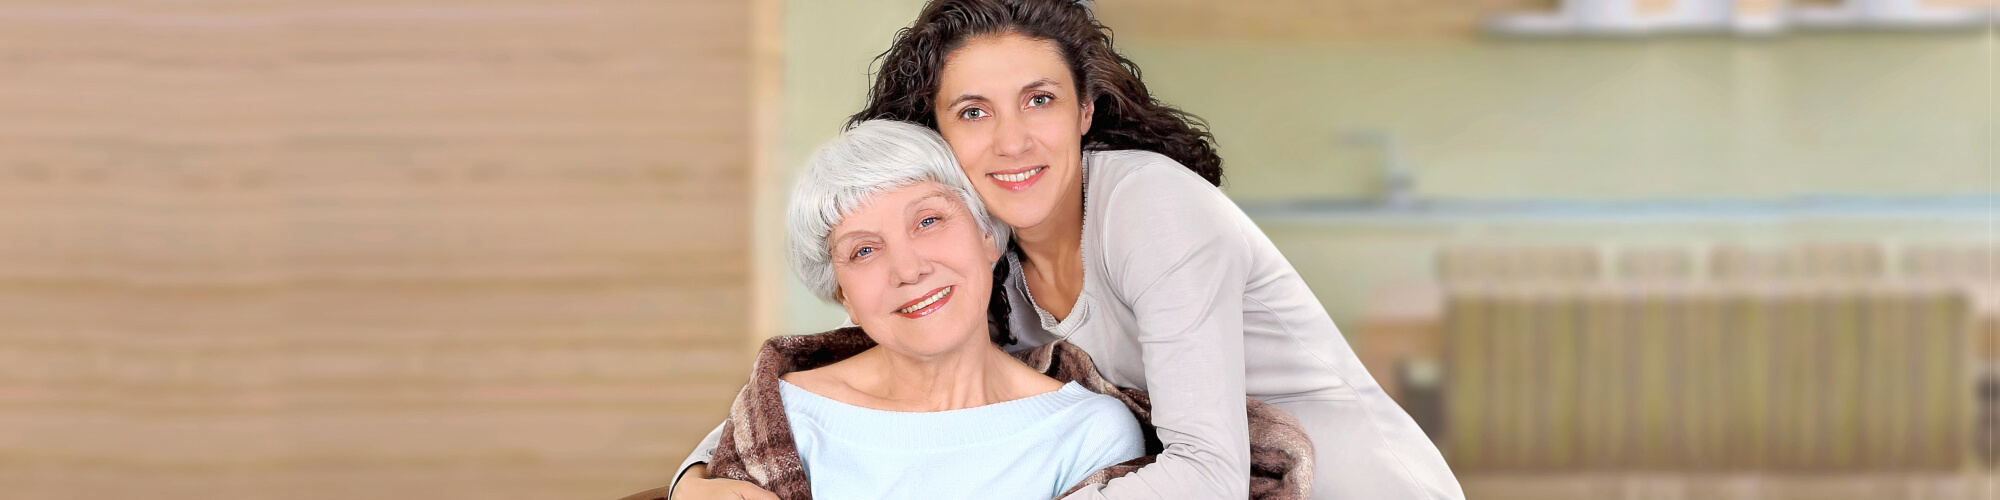 elderly and woman smiling